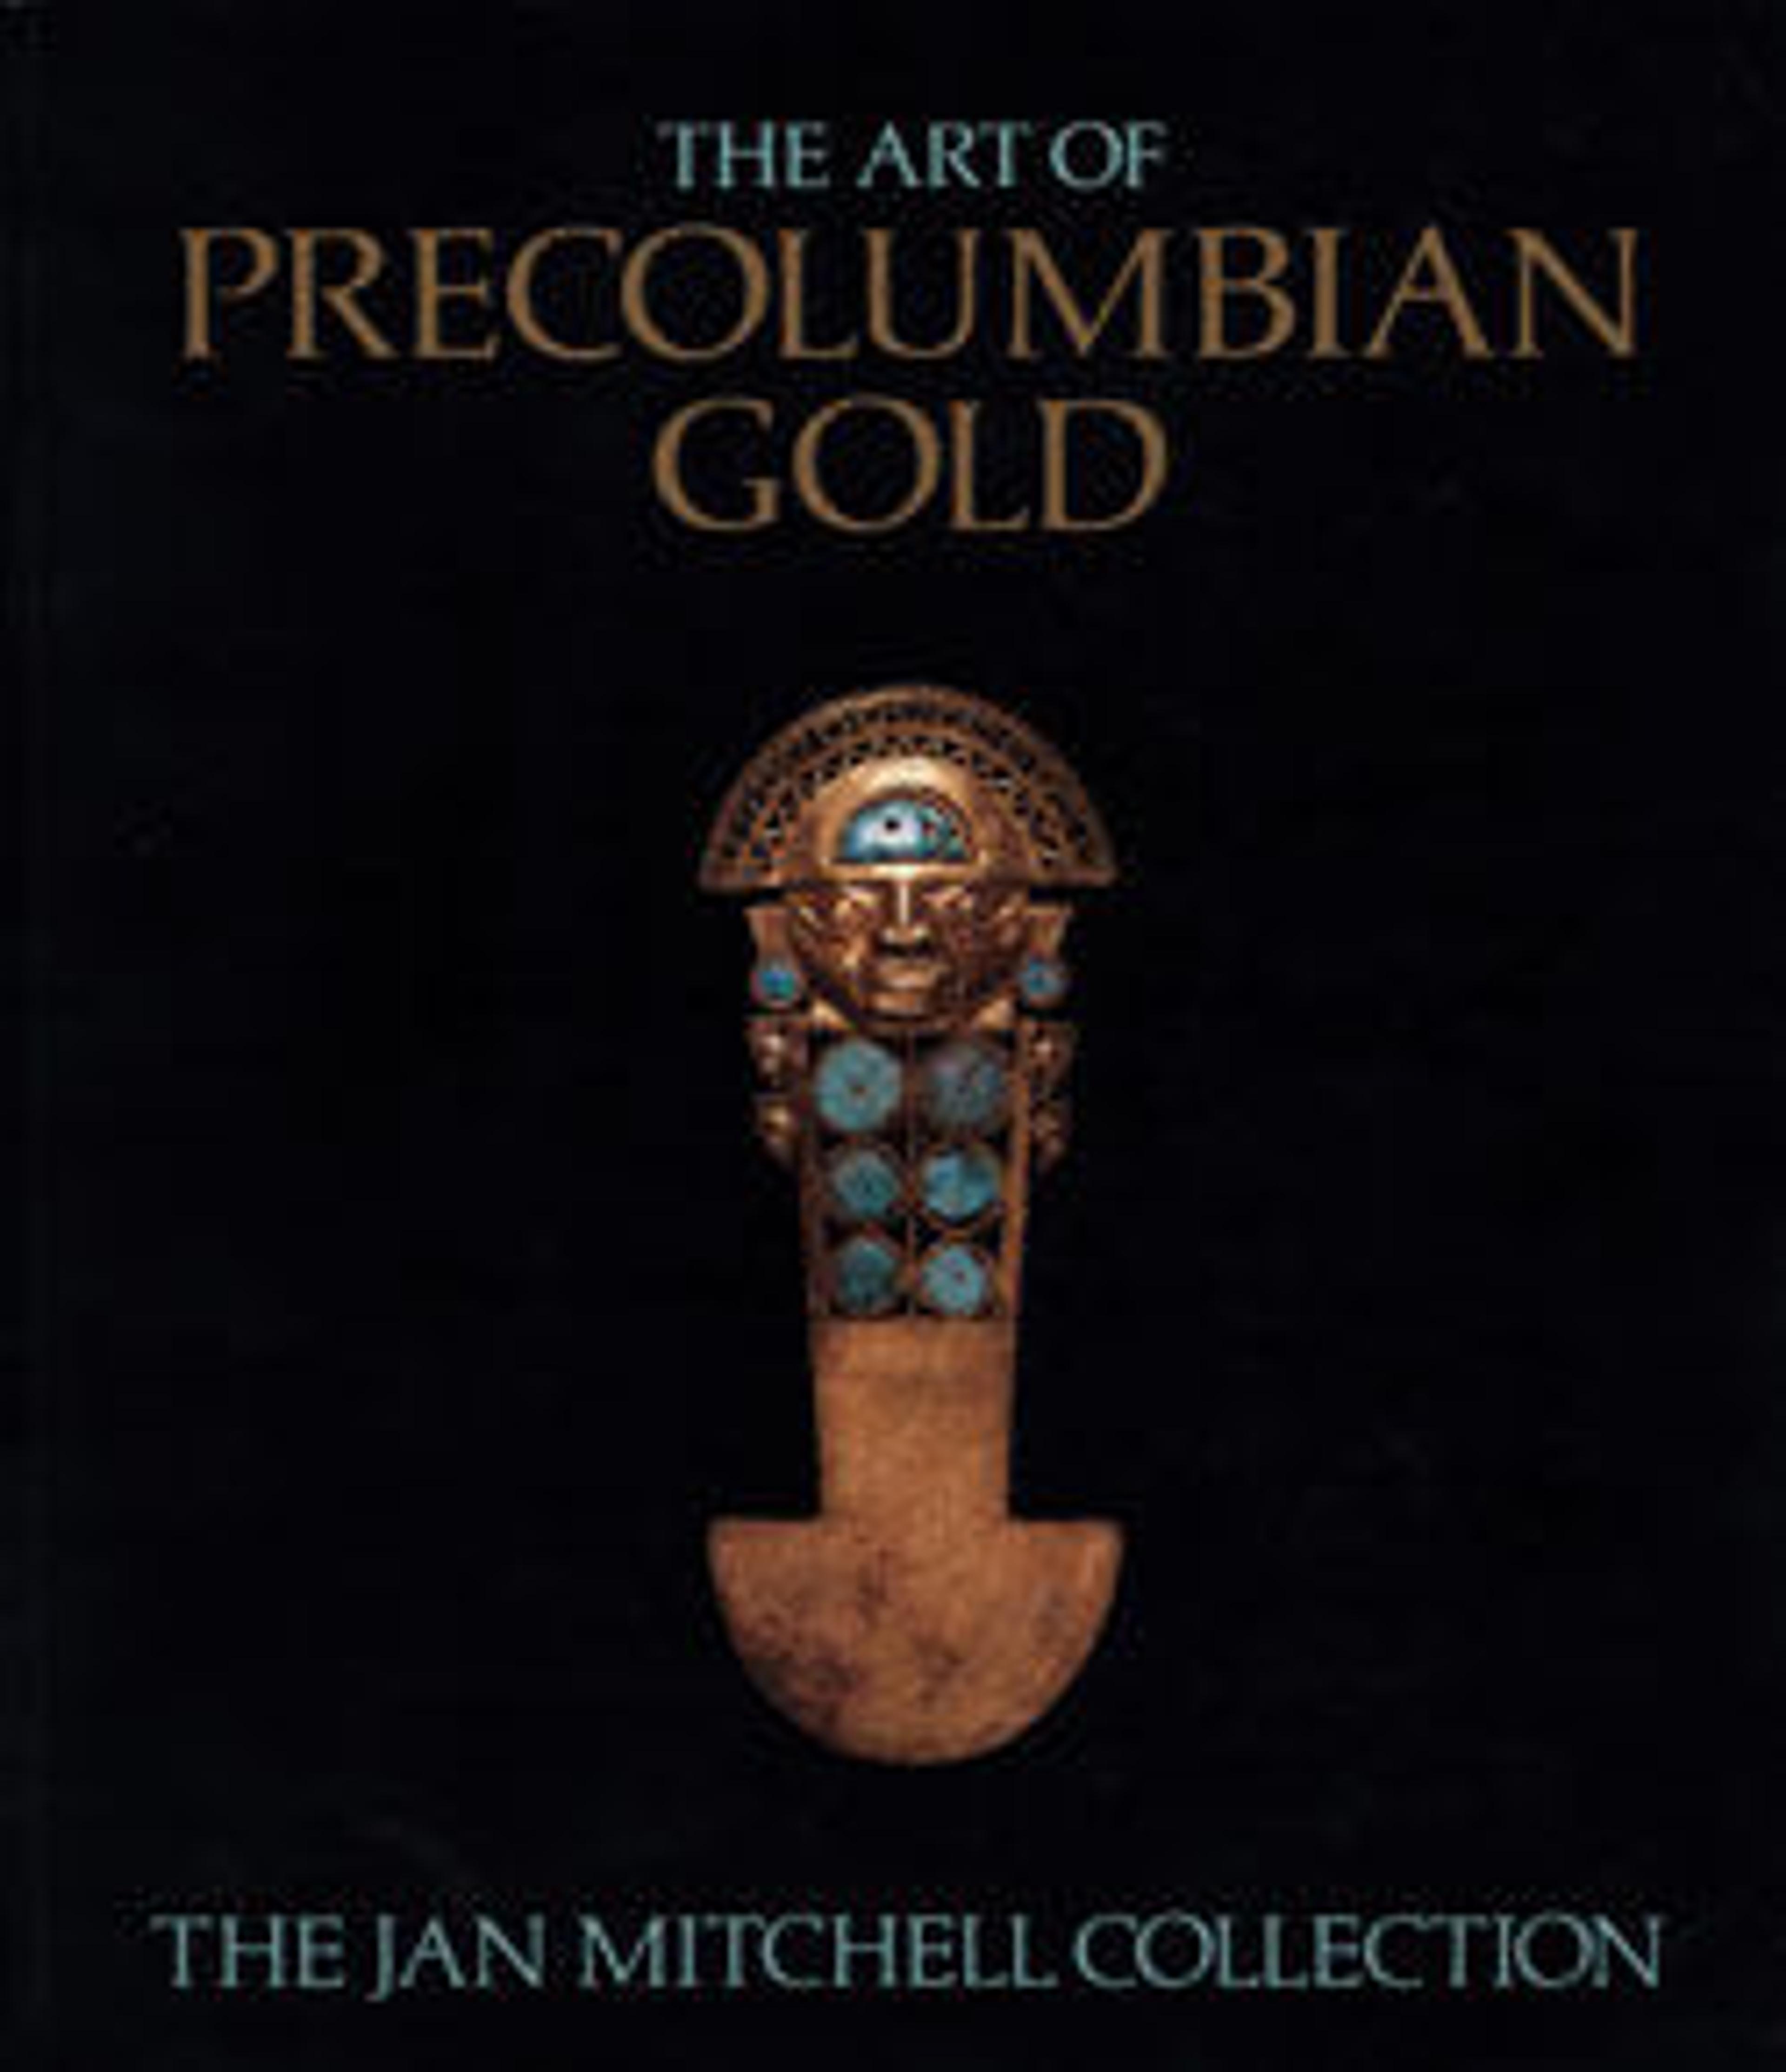 The Art of Precolumbian Gold: The Jan Mitchell Collection